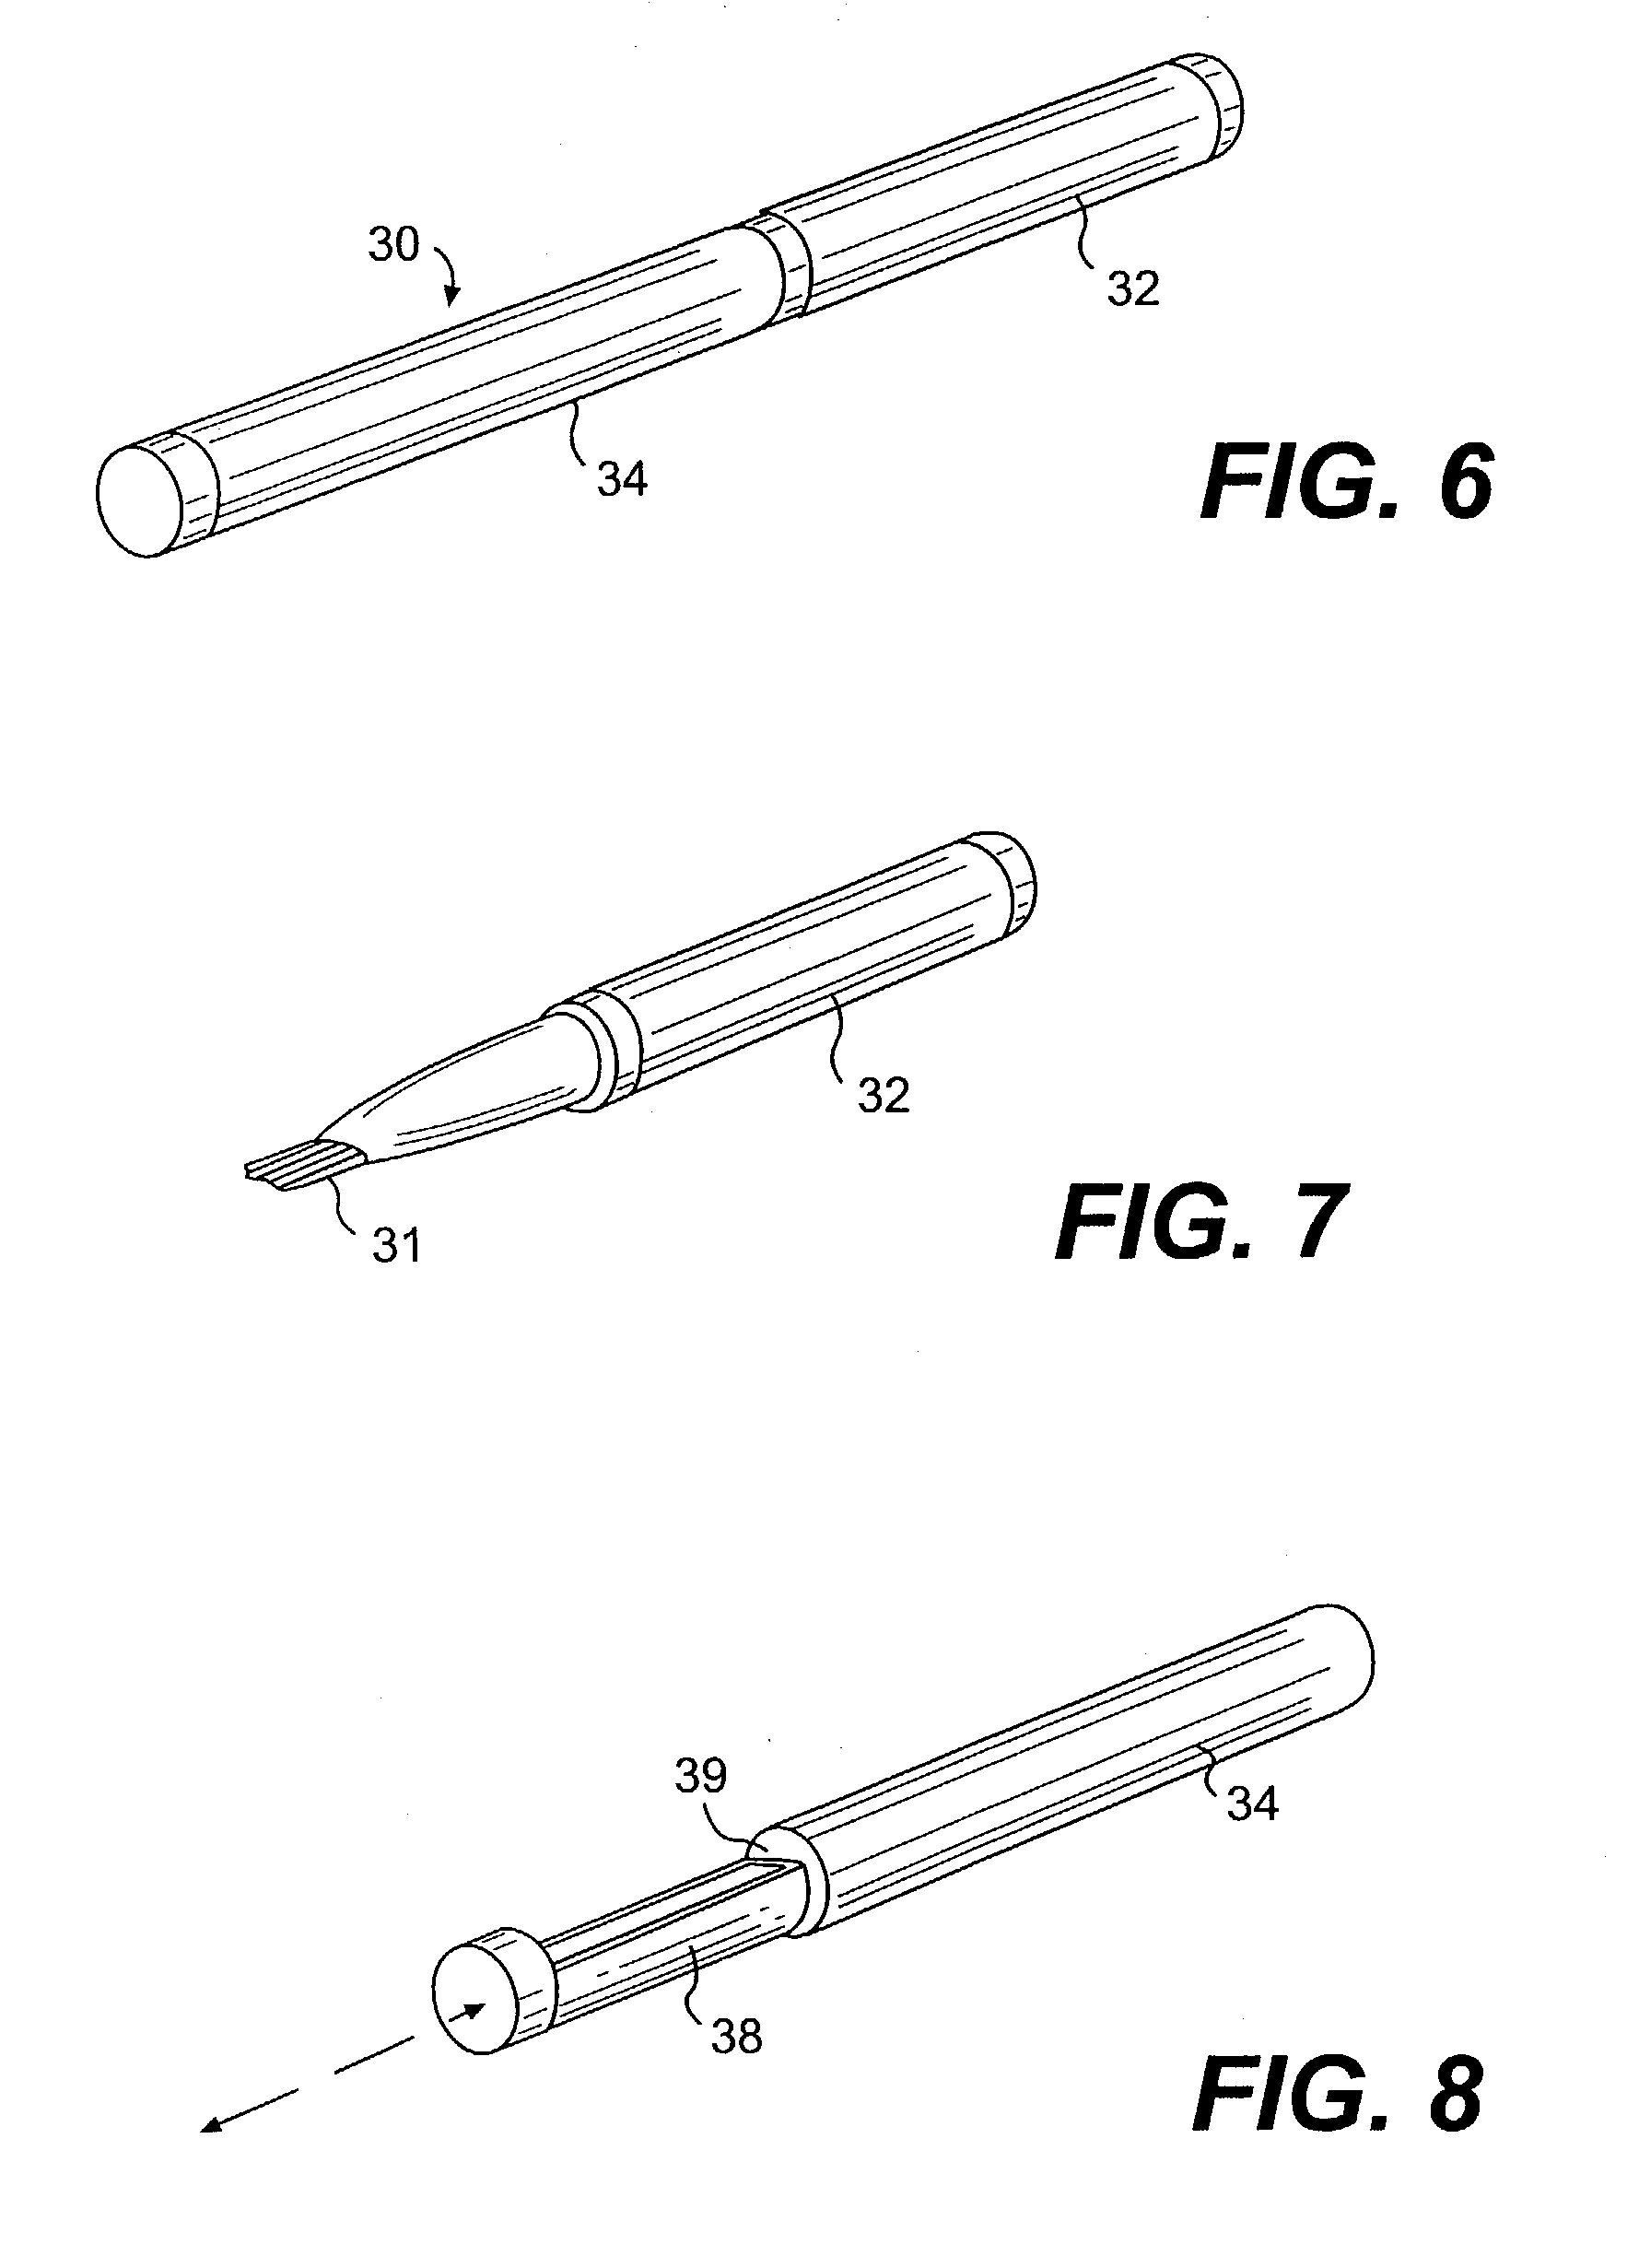 Material dispenser with applicator